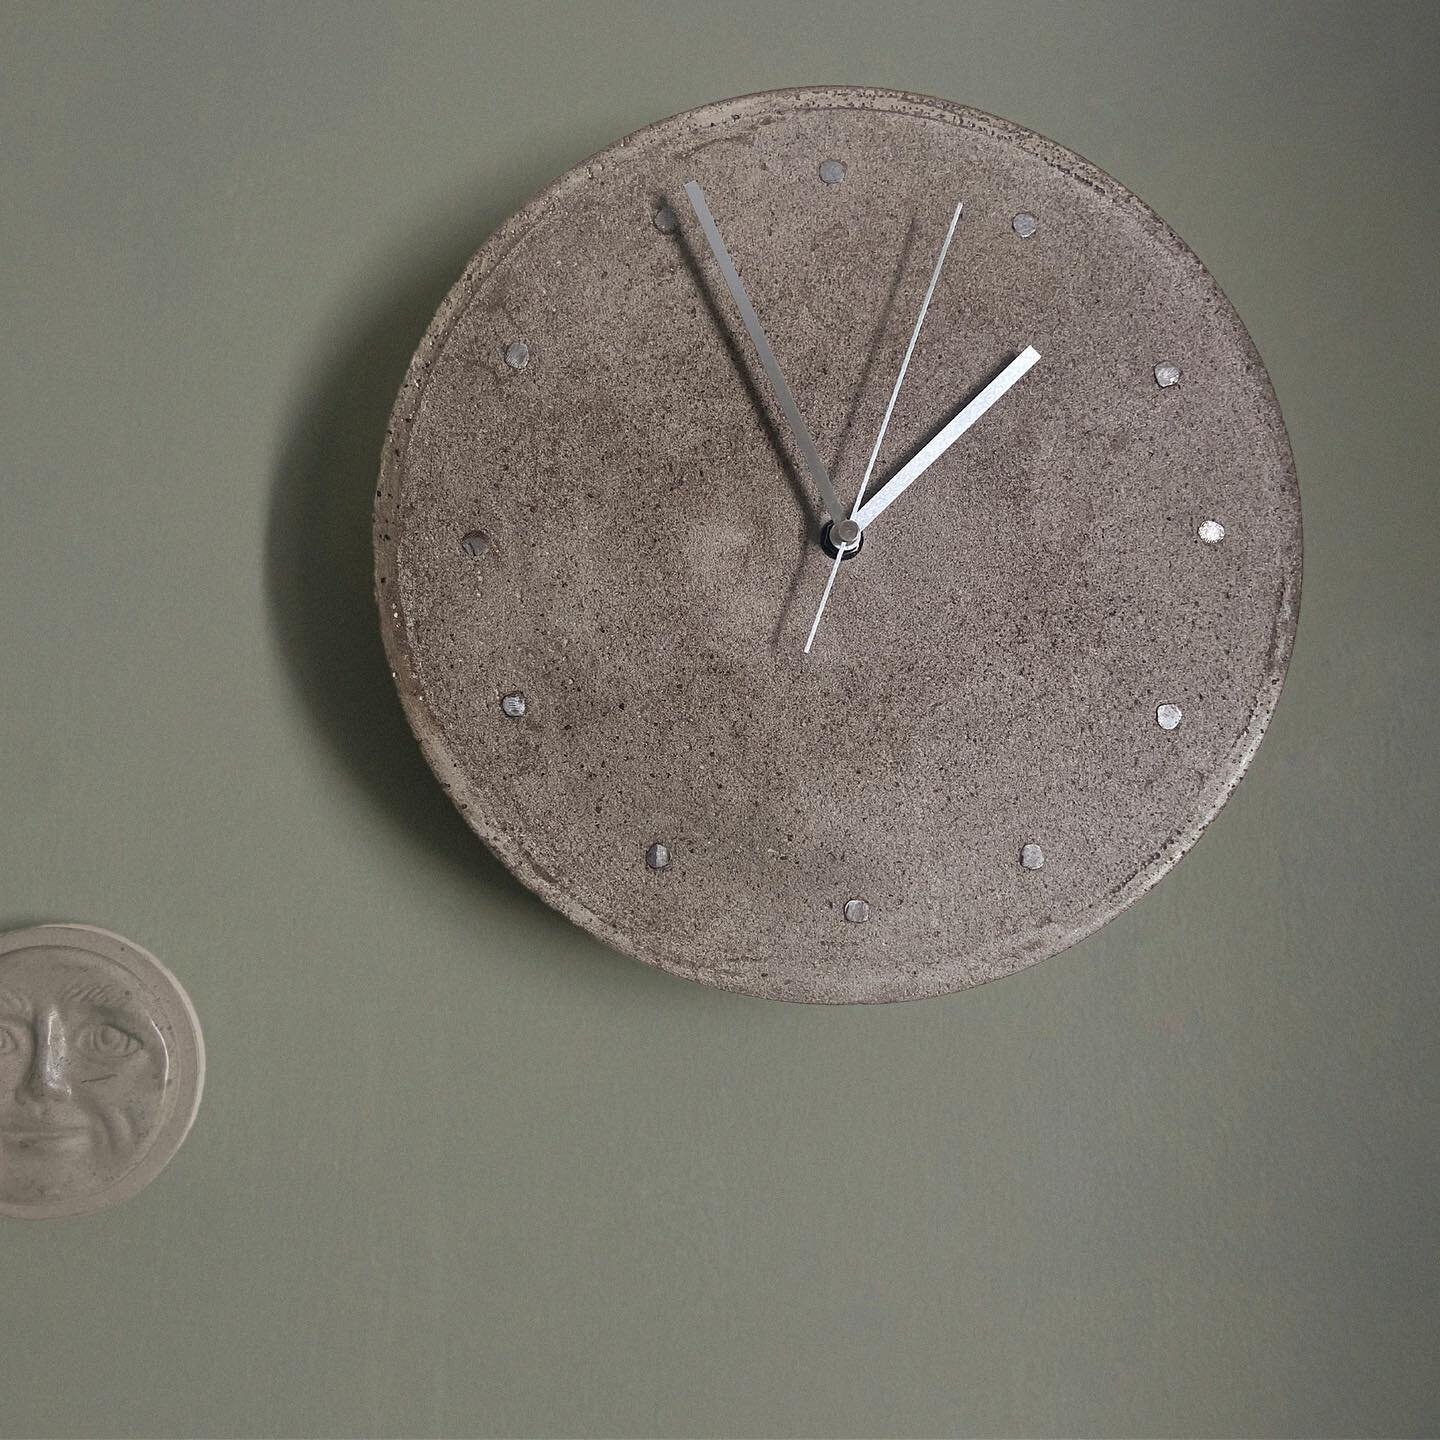 DEATH TO BORING WALLS&hellip;

The Monolith Wall Clock is an ode to Brutalist design, a pared back nod to industrial materials: brushed metal mechanisms, reclaimed rebar time signatures, and sustainably-focused concrete design. 

Comes with batteries